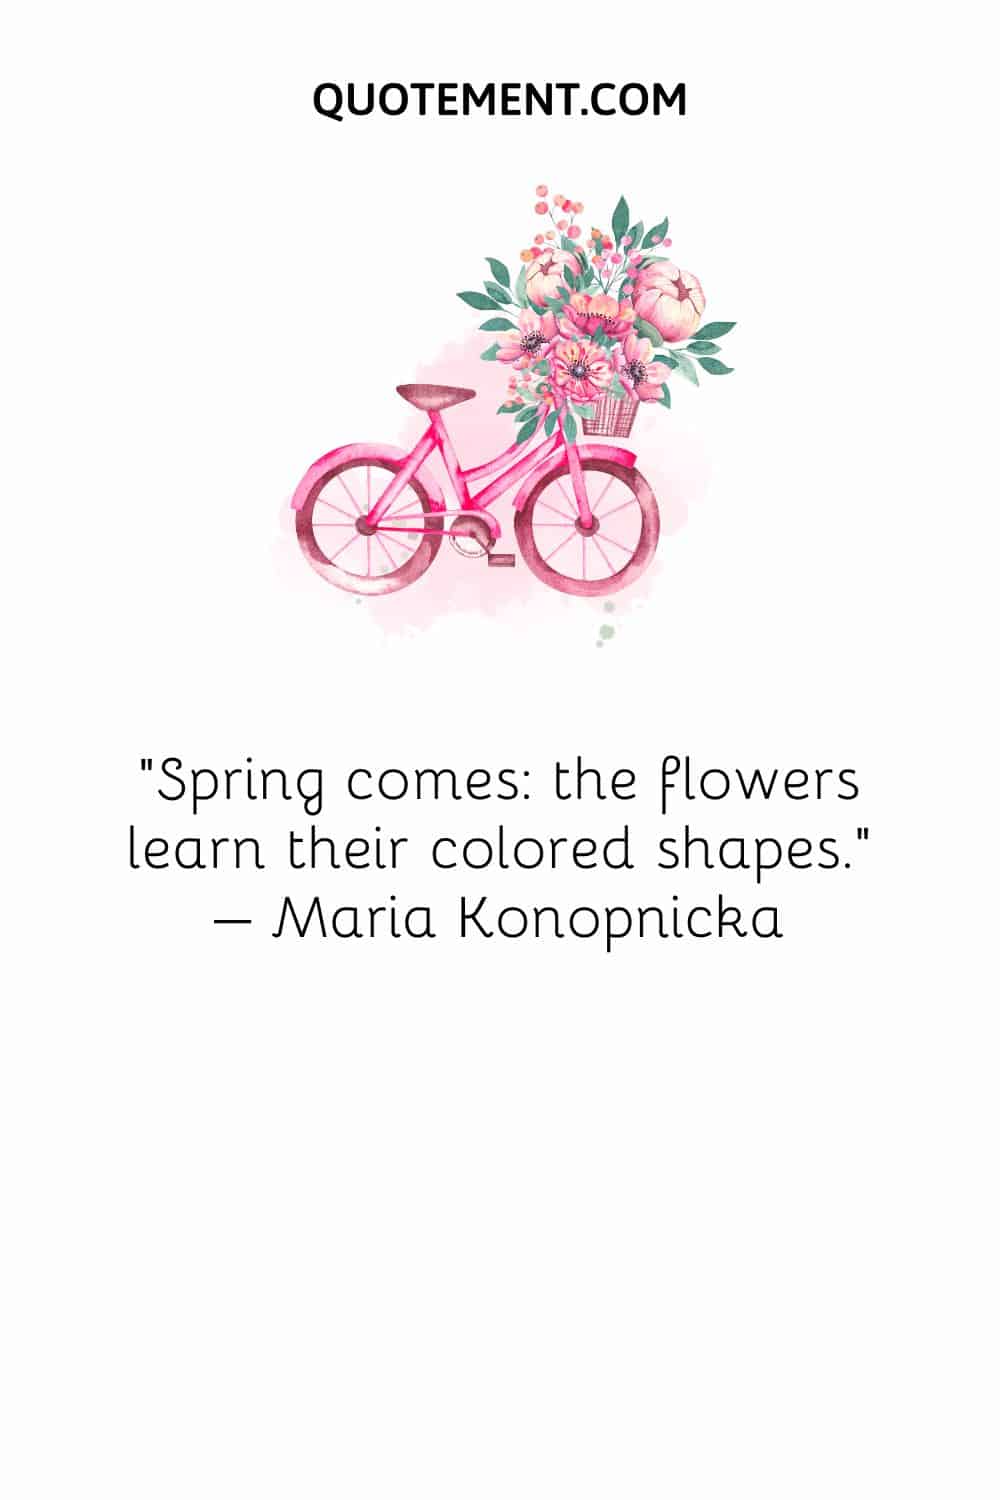 Spring comes the flowers learn their colored shapes. – Maria Konopnicka